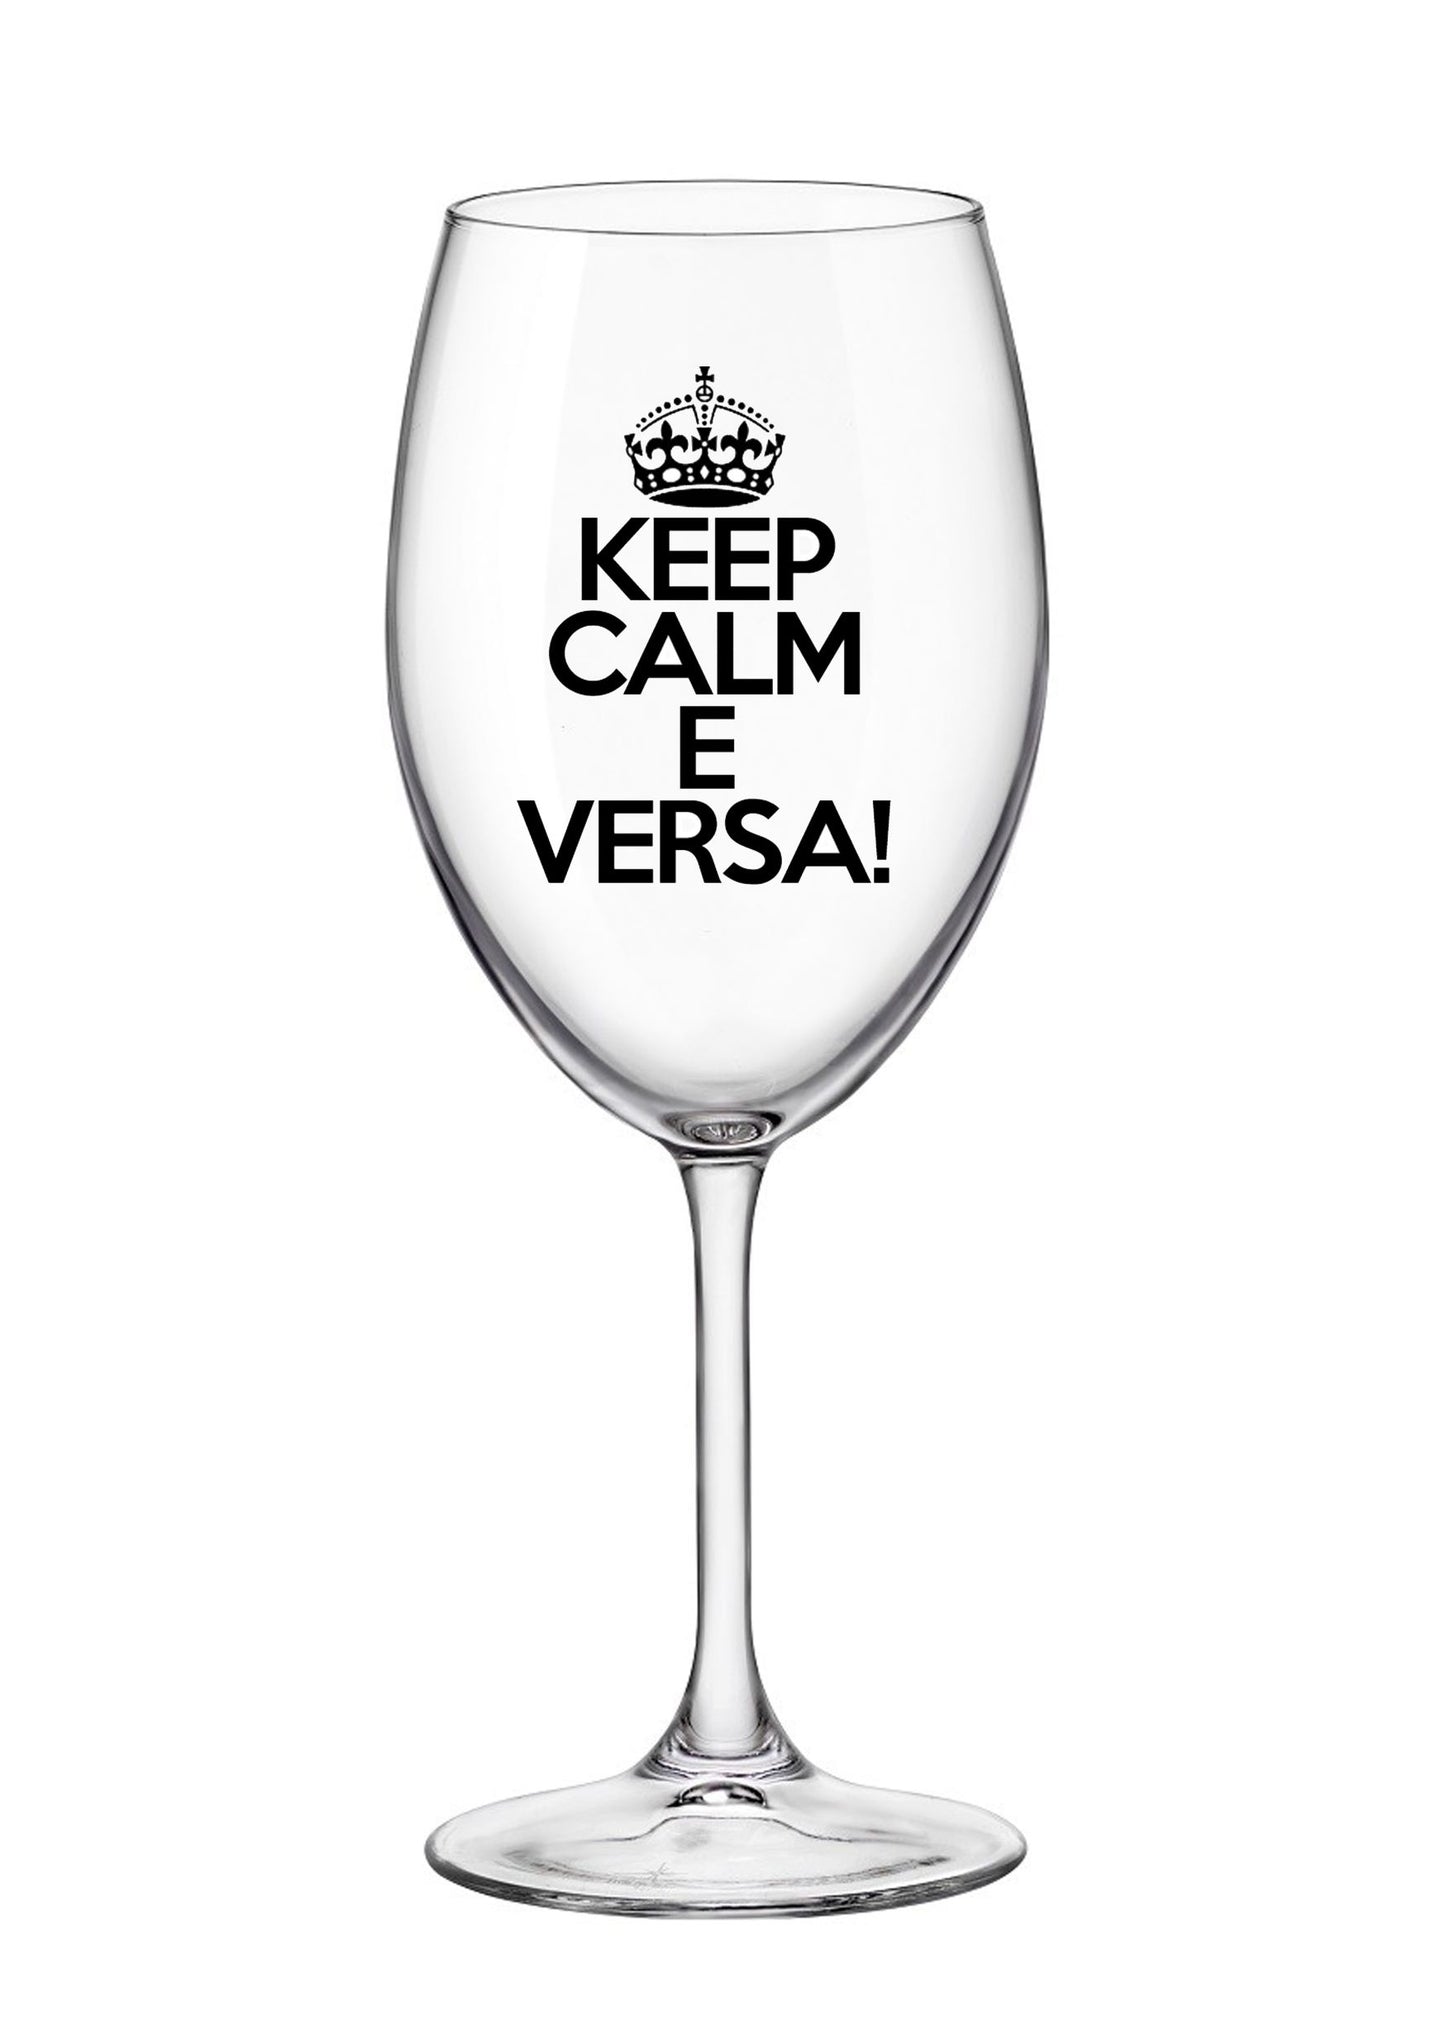 Spritz wine glass - keep calm and pour! fun gift